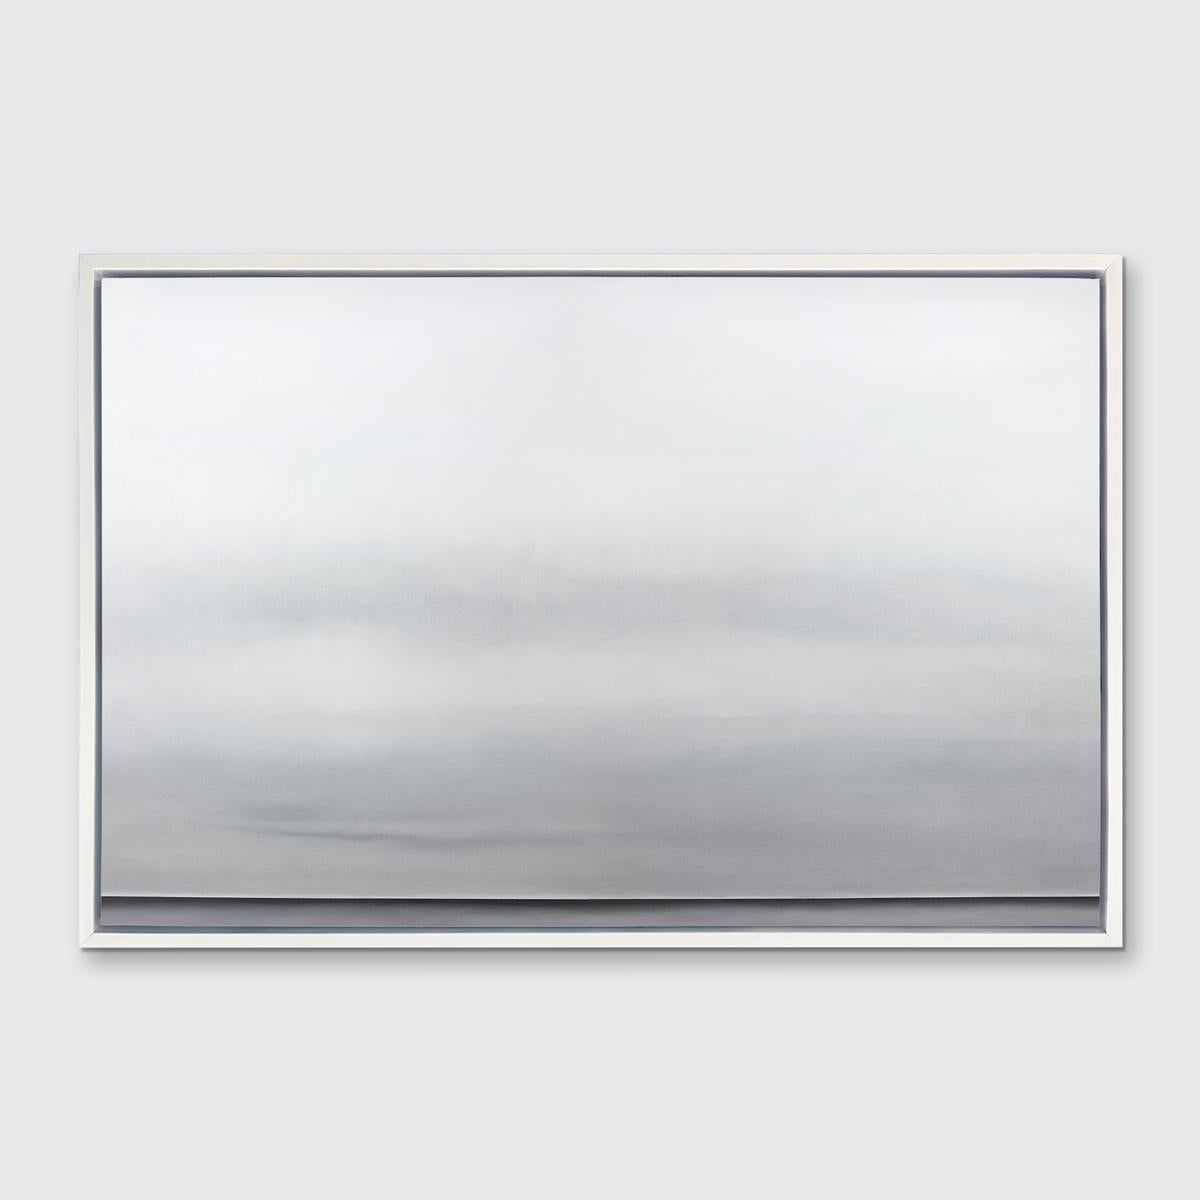 Tony Iadicicco Abstract Print - "Starting the Day" Framed Limited Edition Giclee Print, 48" x 72"